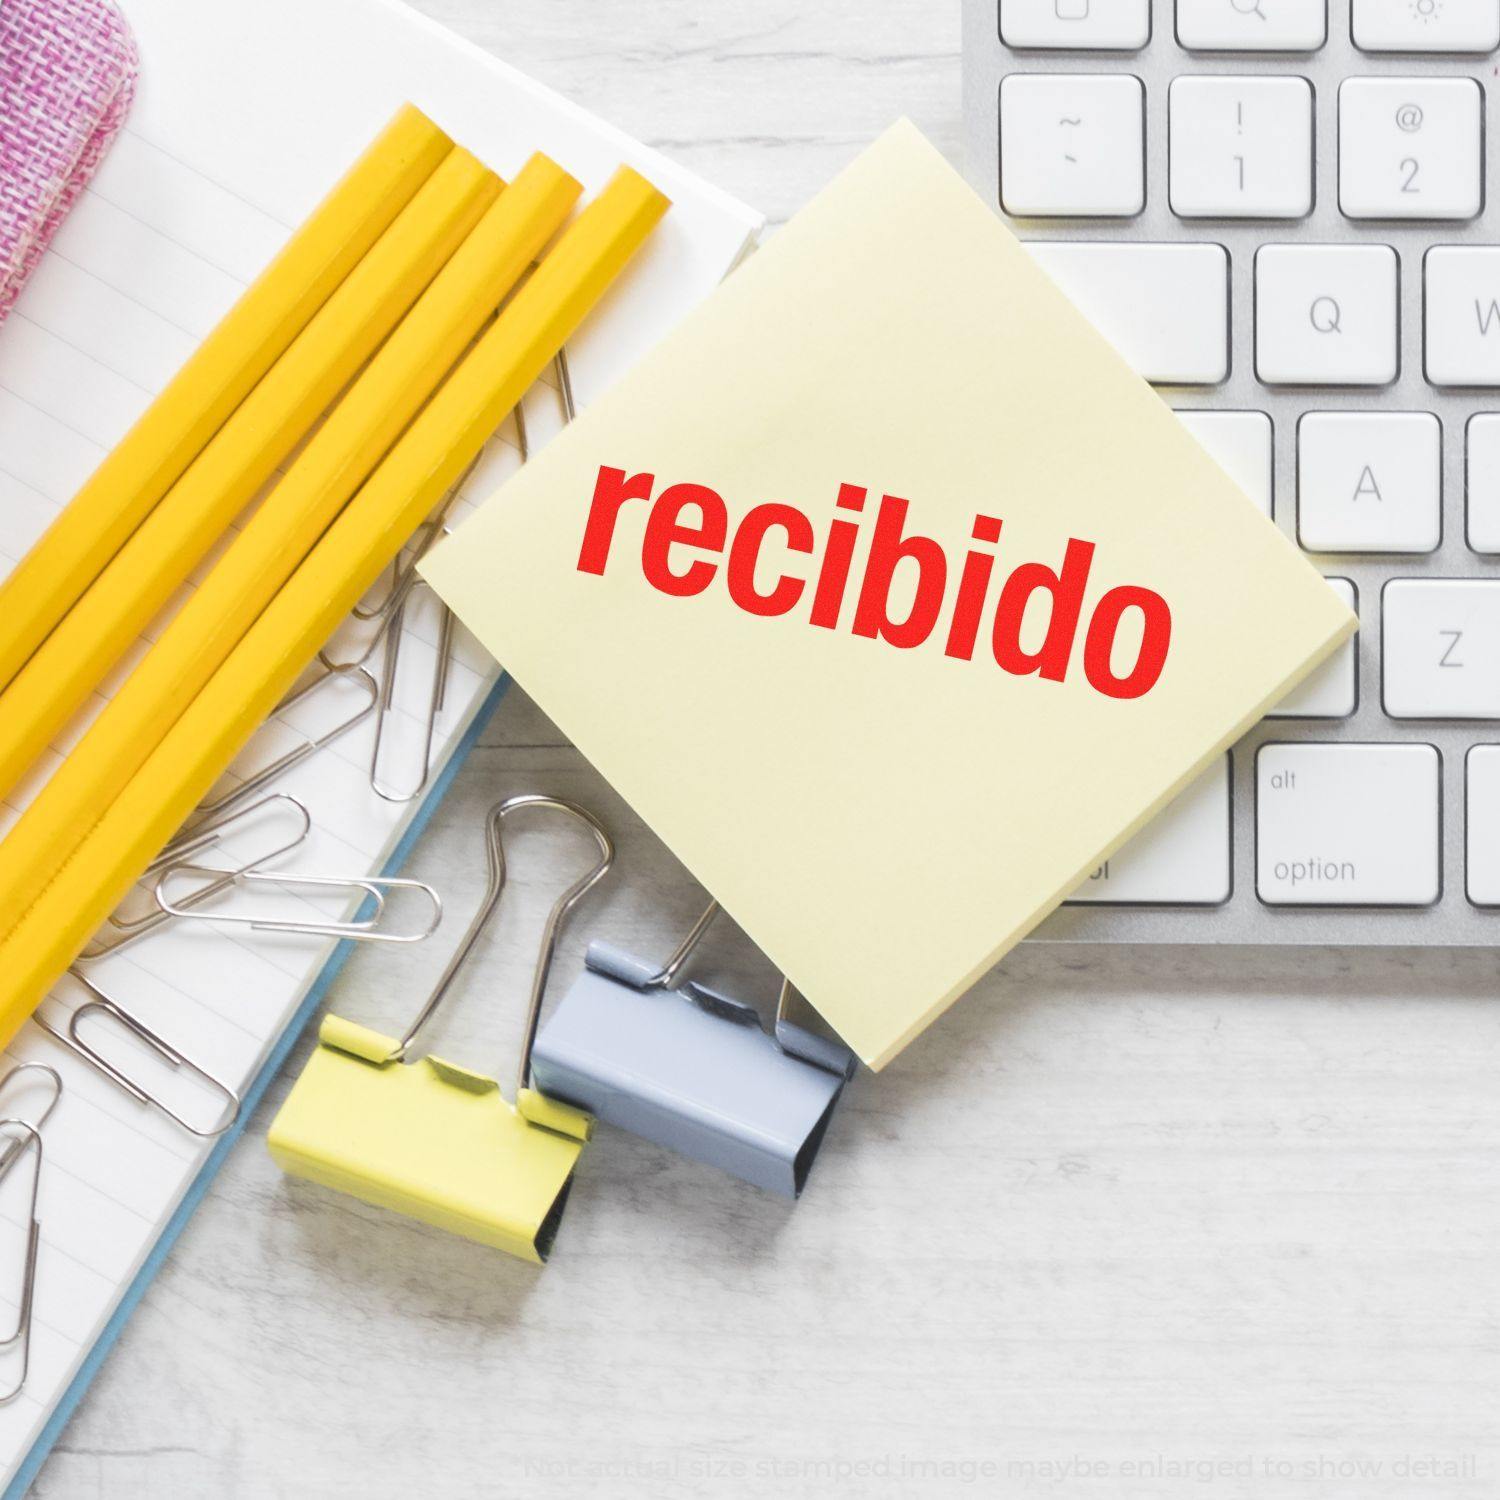 A self-inking stamp with a stamped image showing how the text "recibido" in bold font is displayed after stamping.